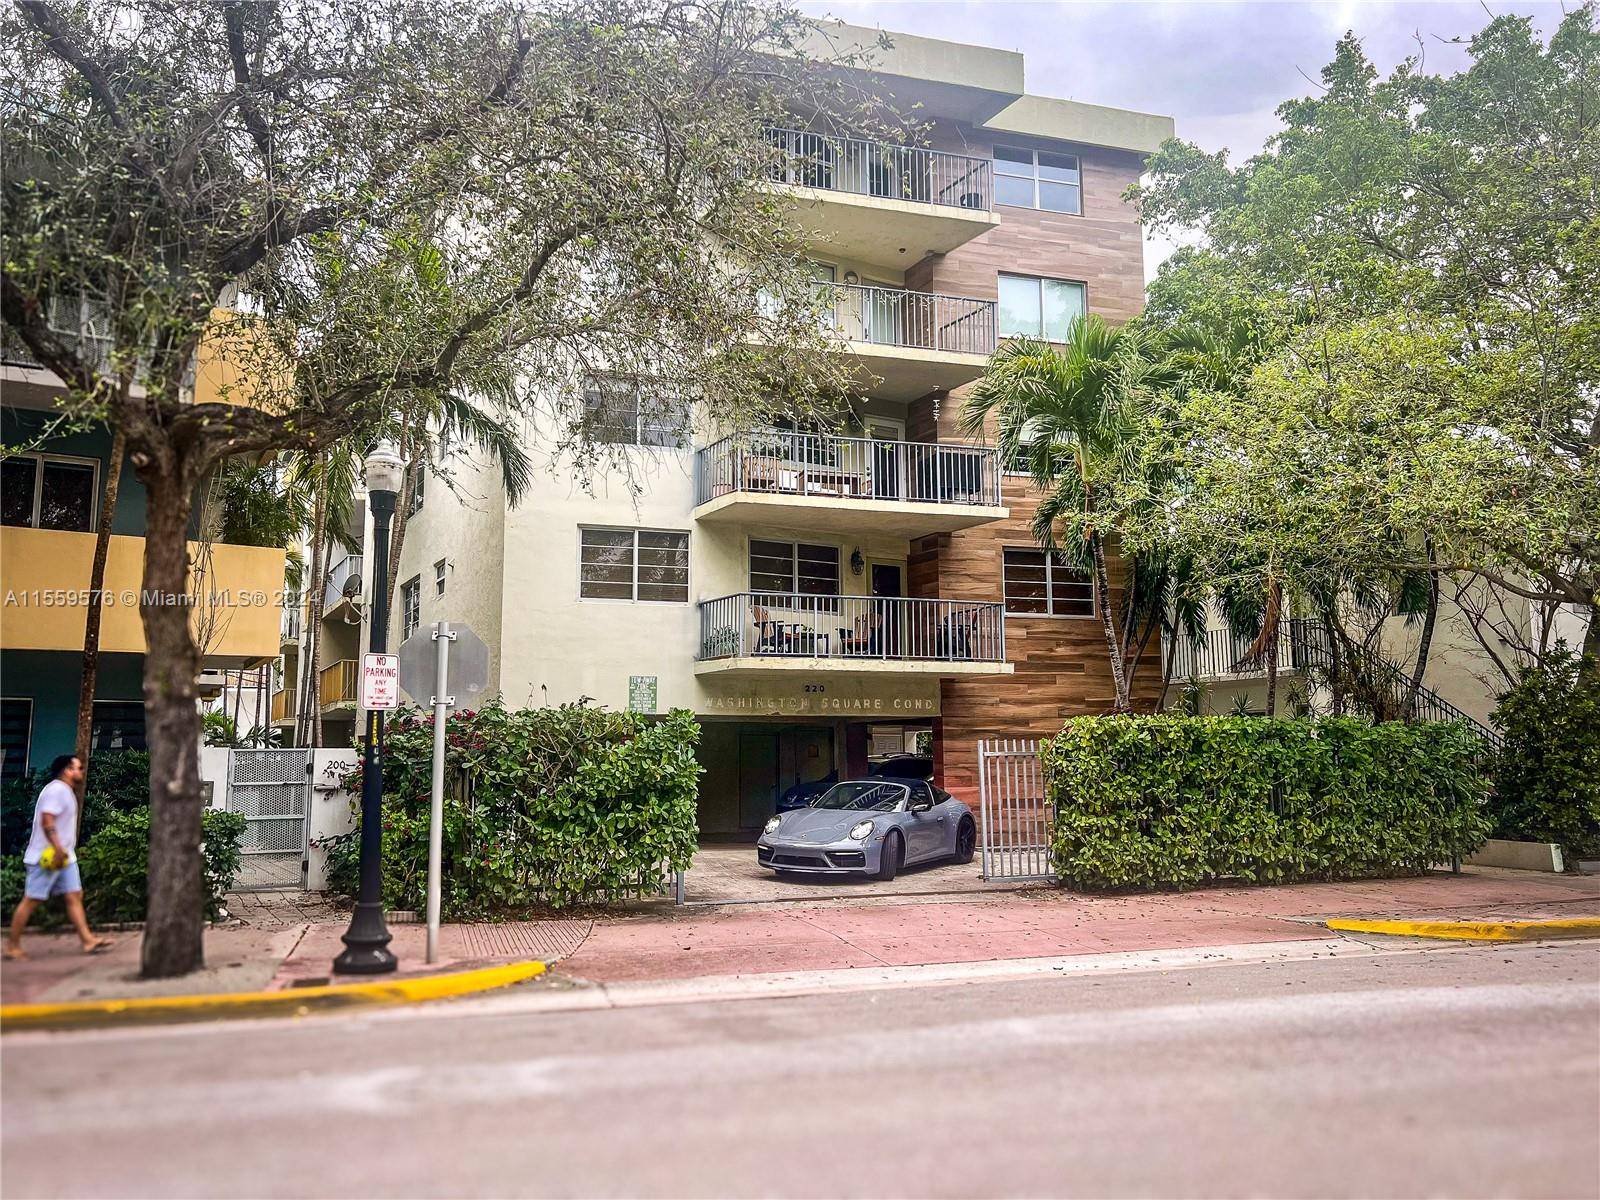 This South of Fifth building features a 1 bed 2 bath apartment with a walk in closet, balcony, and washer dryer inside the unit.